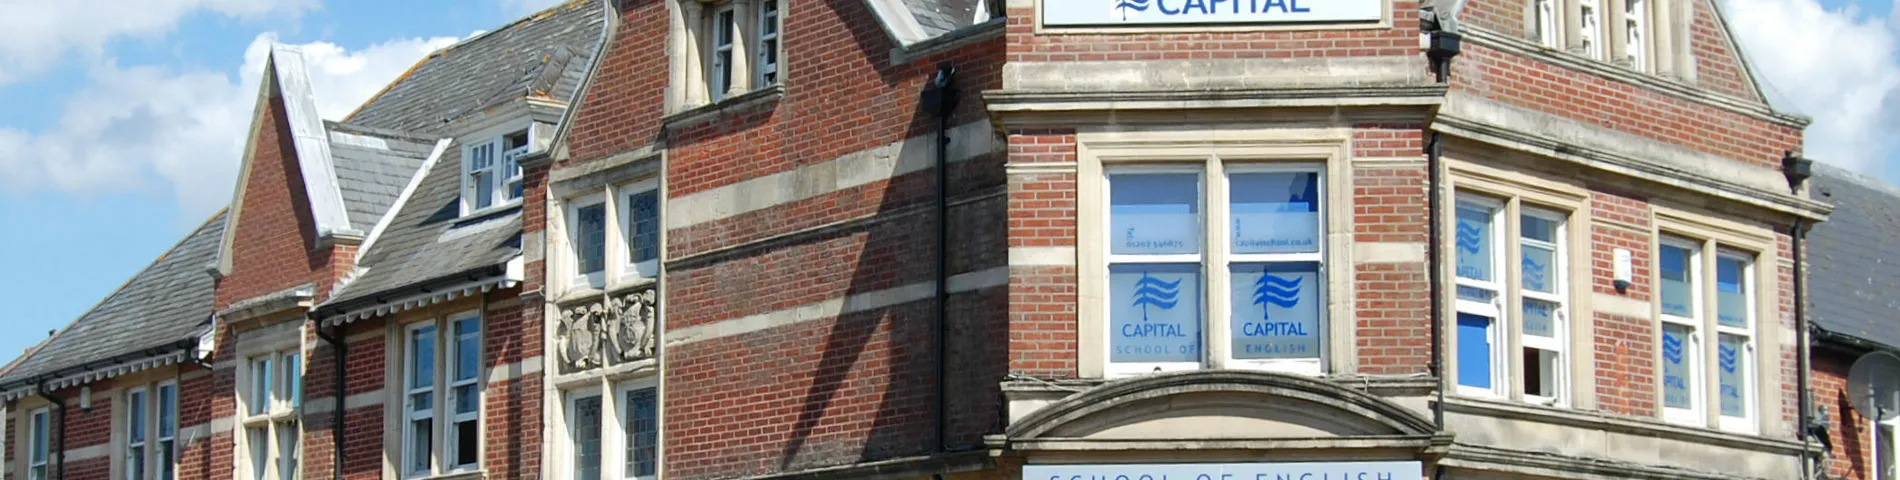 Capital School of English picture 1